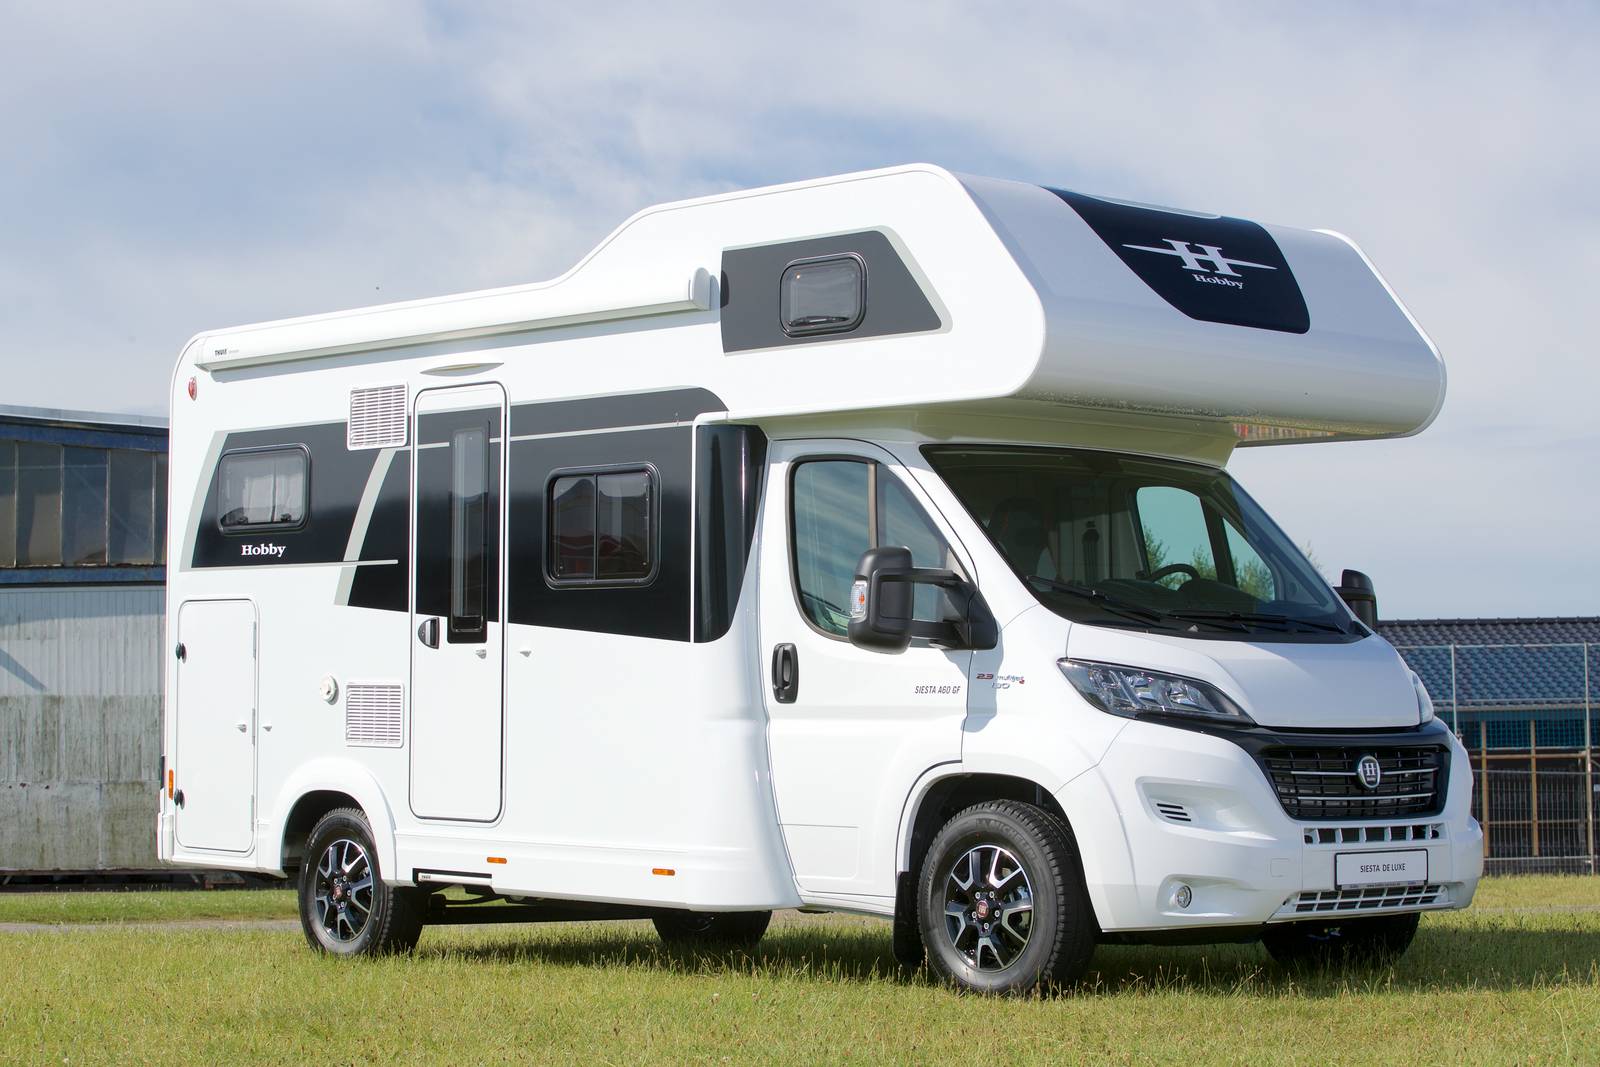 Family Motorhome Rental in Iceland for 5 people